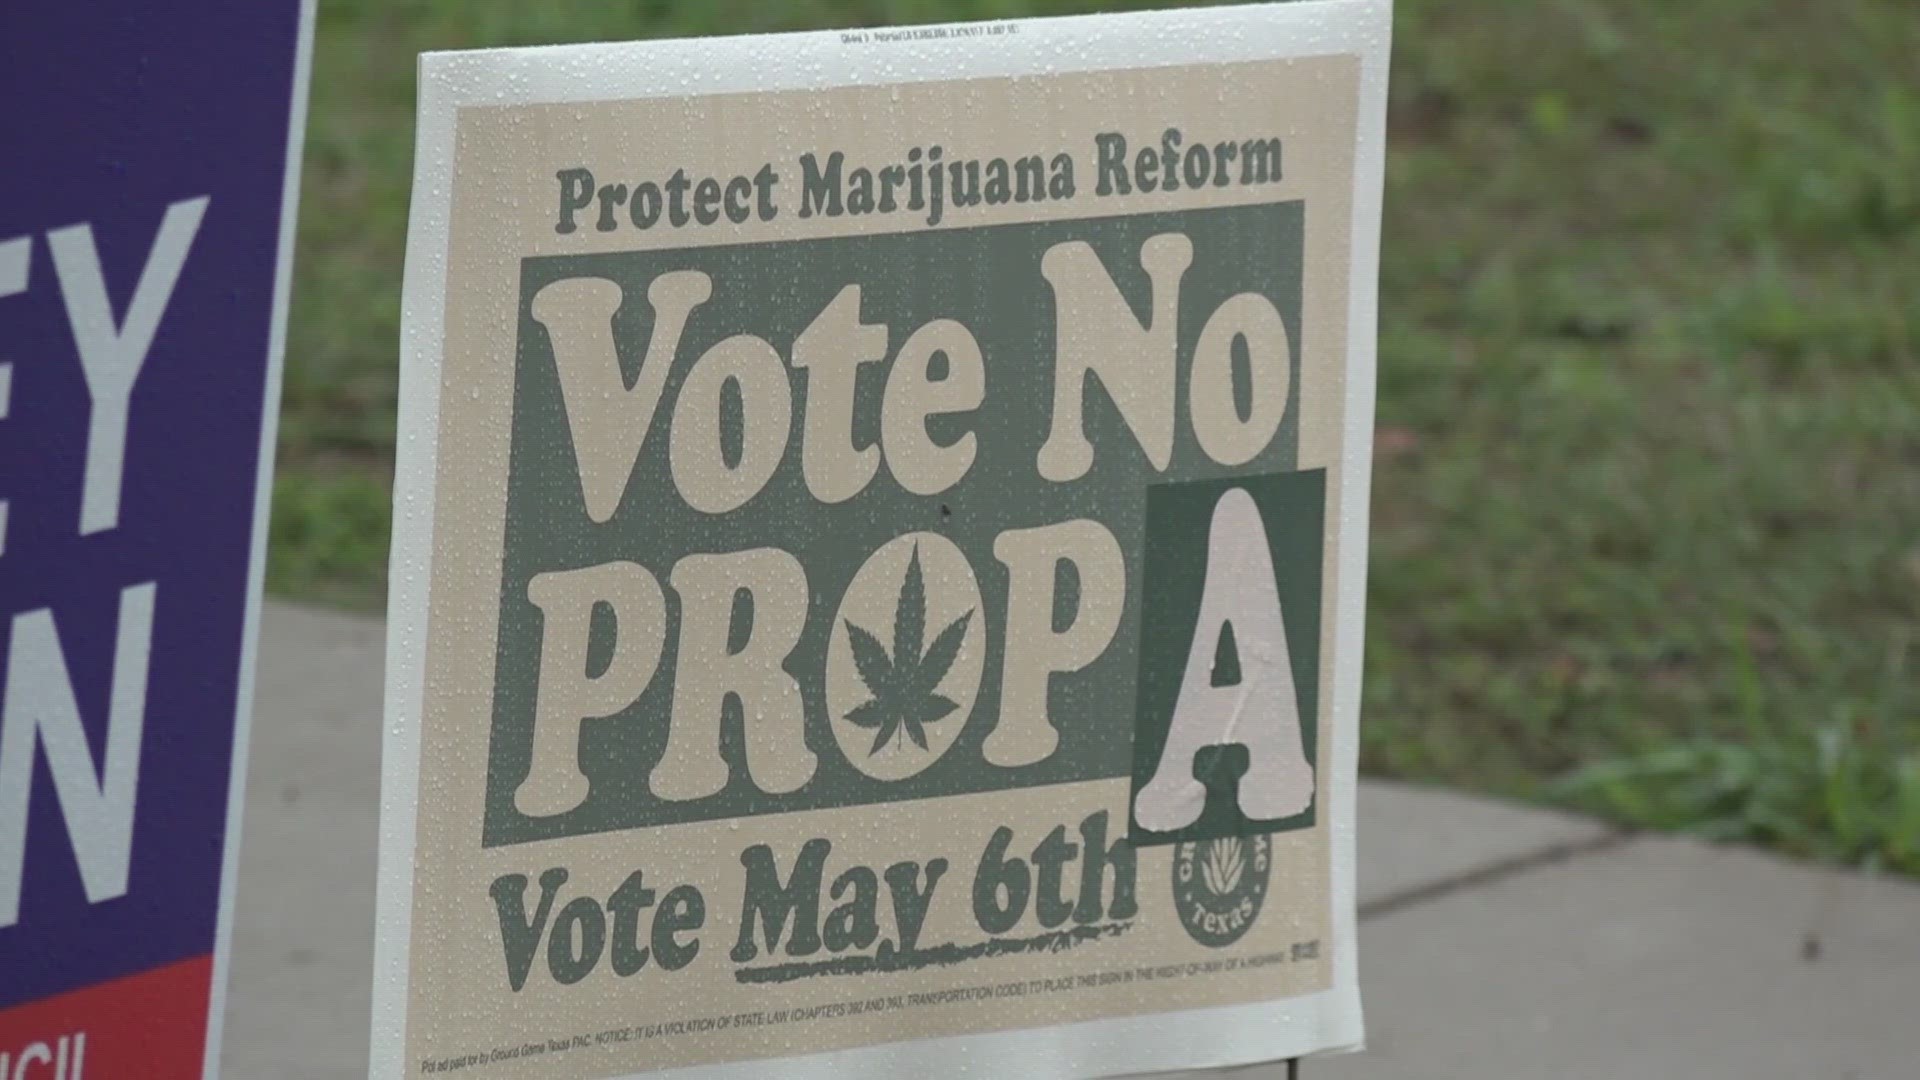 It's been over a year since residents voted to approve Proposition A in Harker Heights, but the city has yet to reform its marijuana enforcement programs.